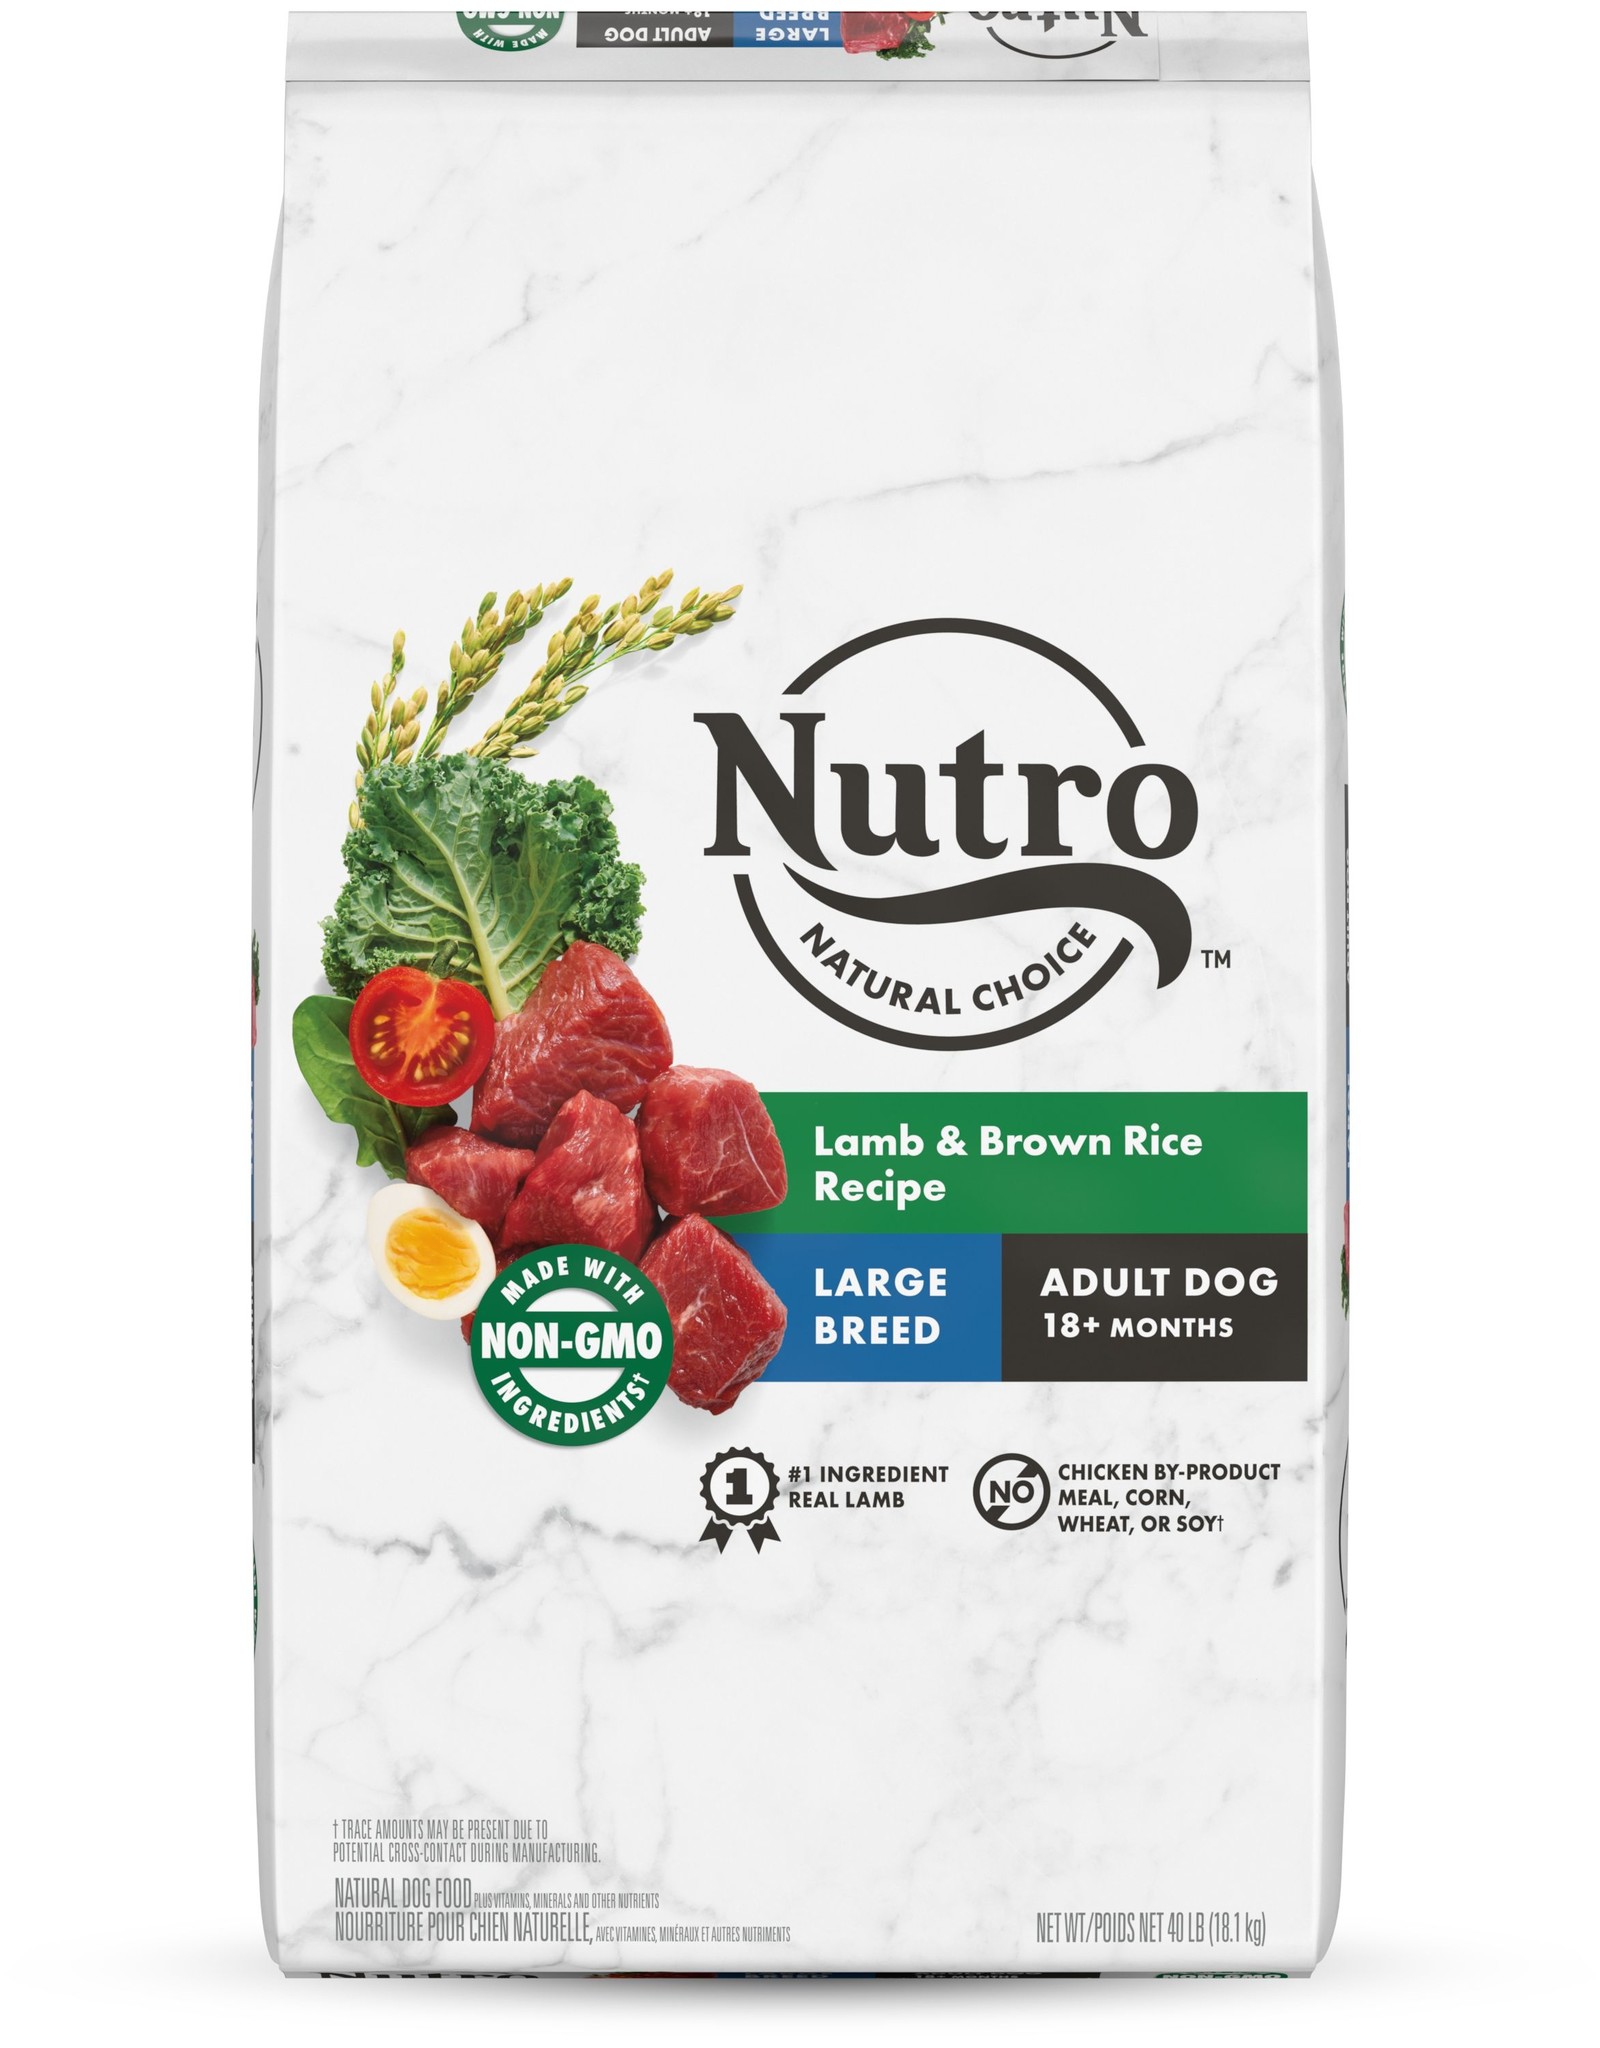 NUTRO PRODUCTS  INC. NUTRO NATURAL CHOICE DOG LARGE BREED LAMB & RICE 30LBS